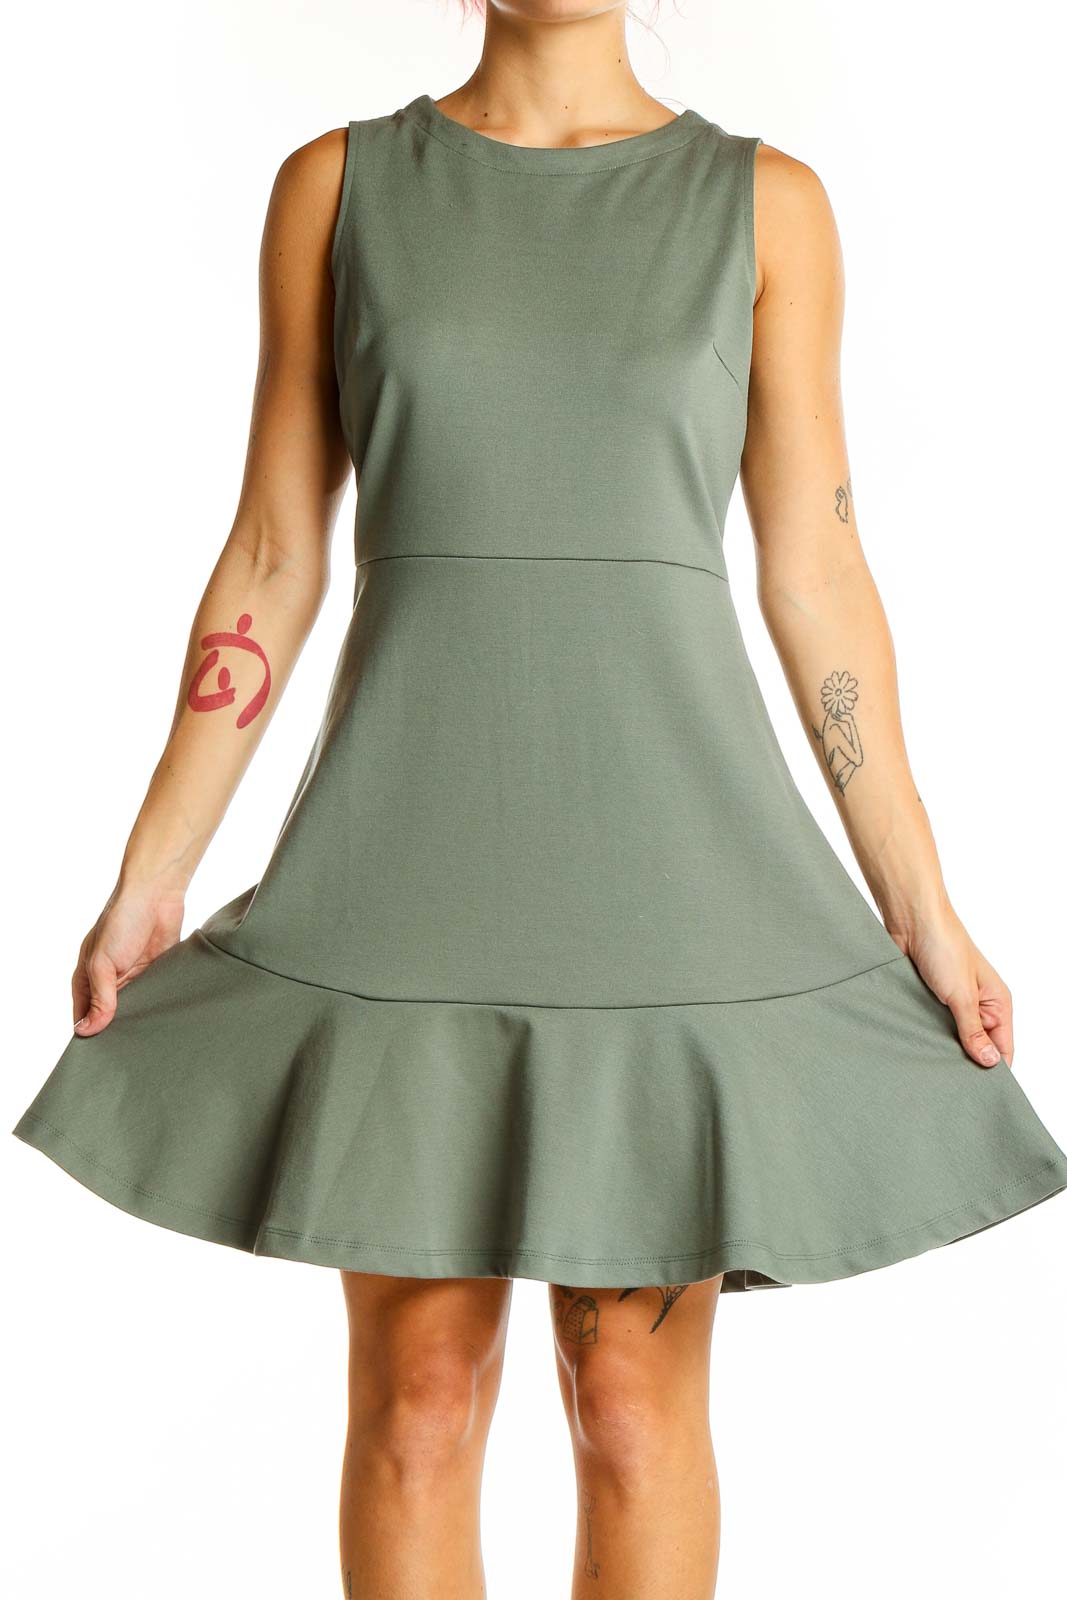 Green Brunch Classic Solid Dress Front